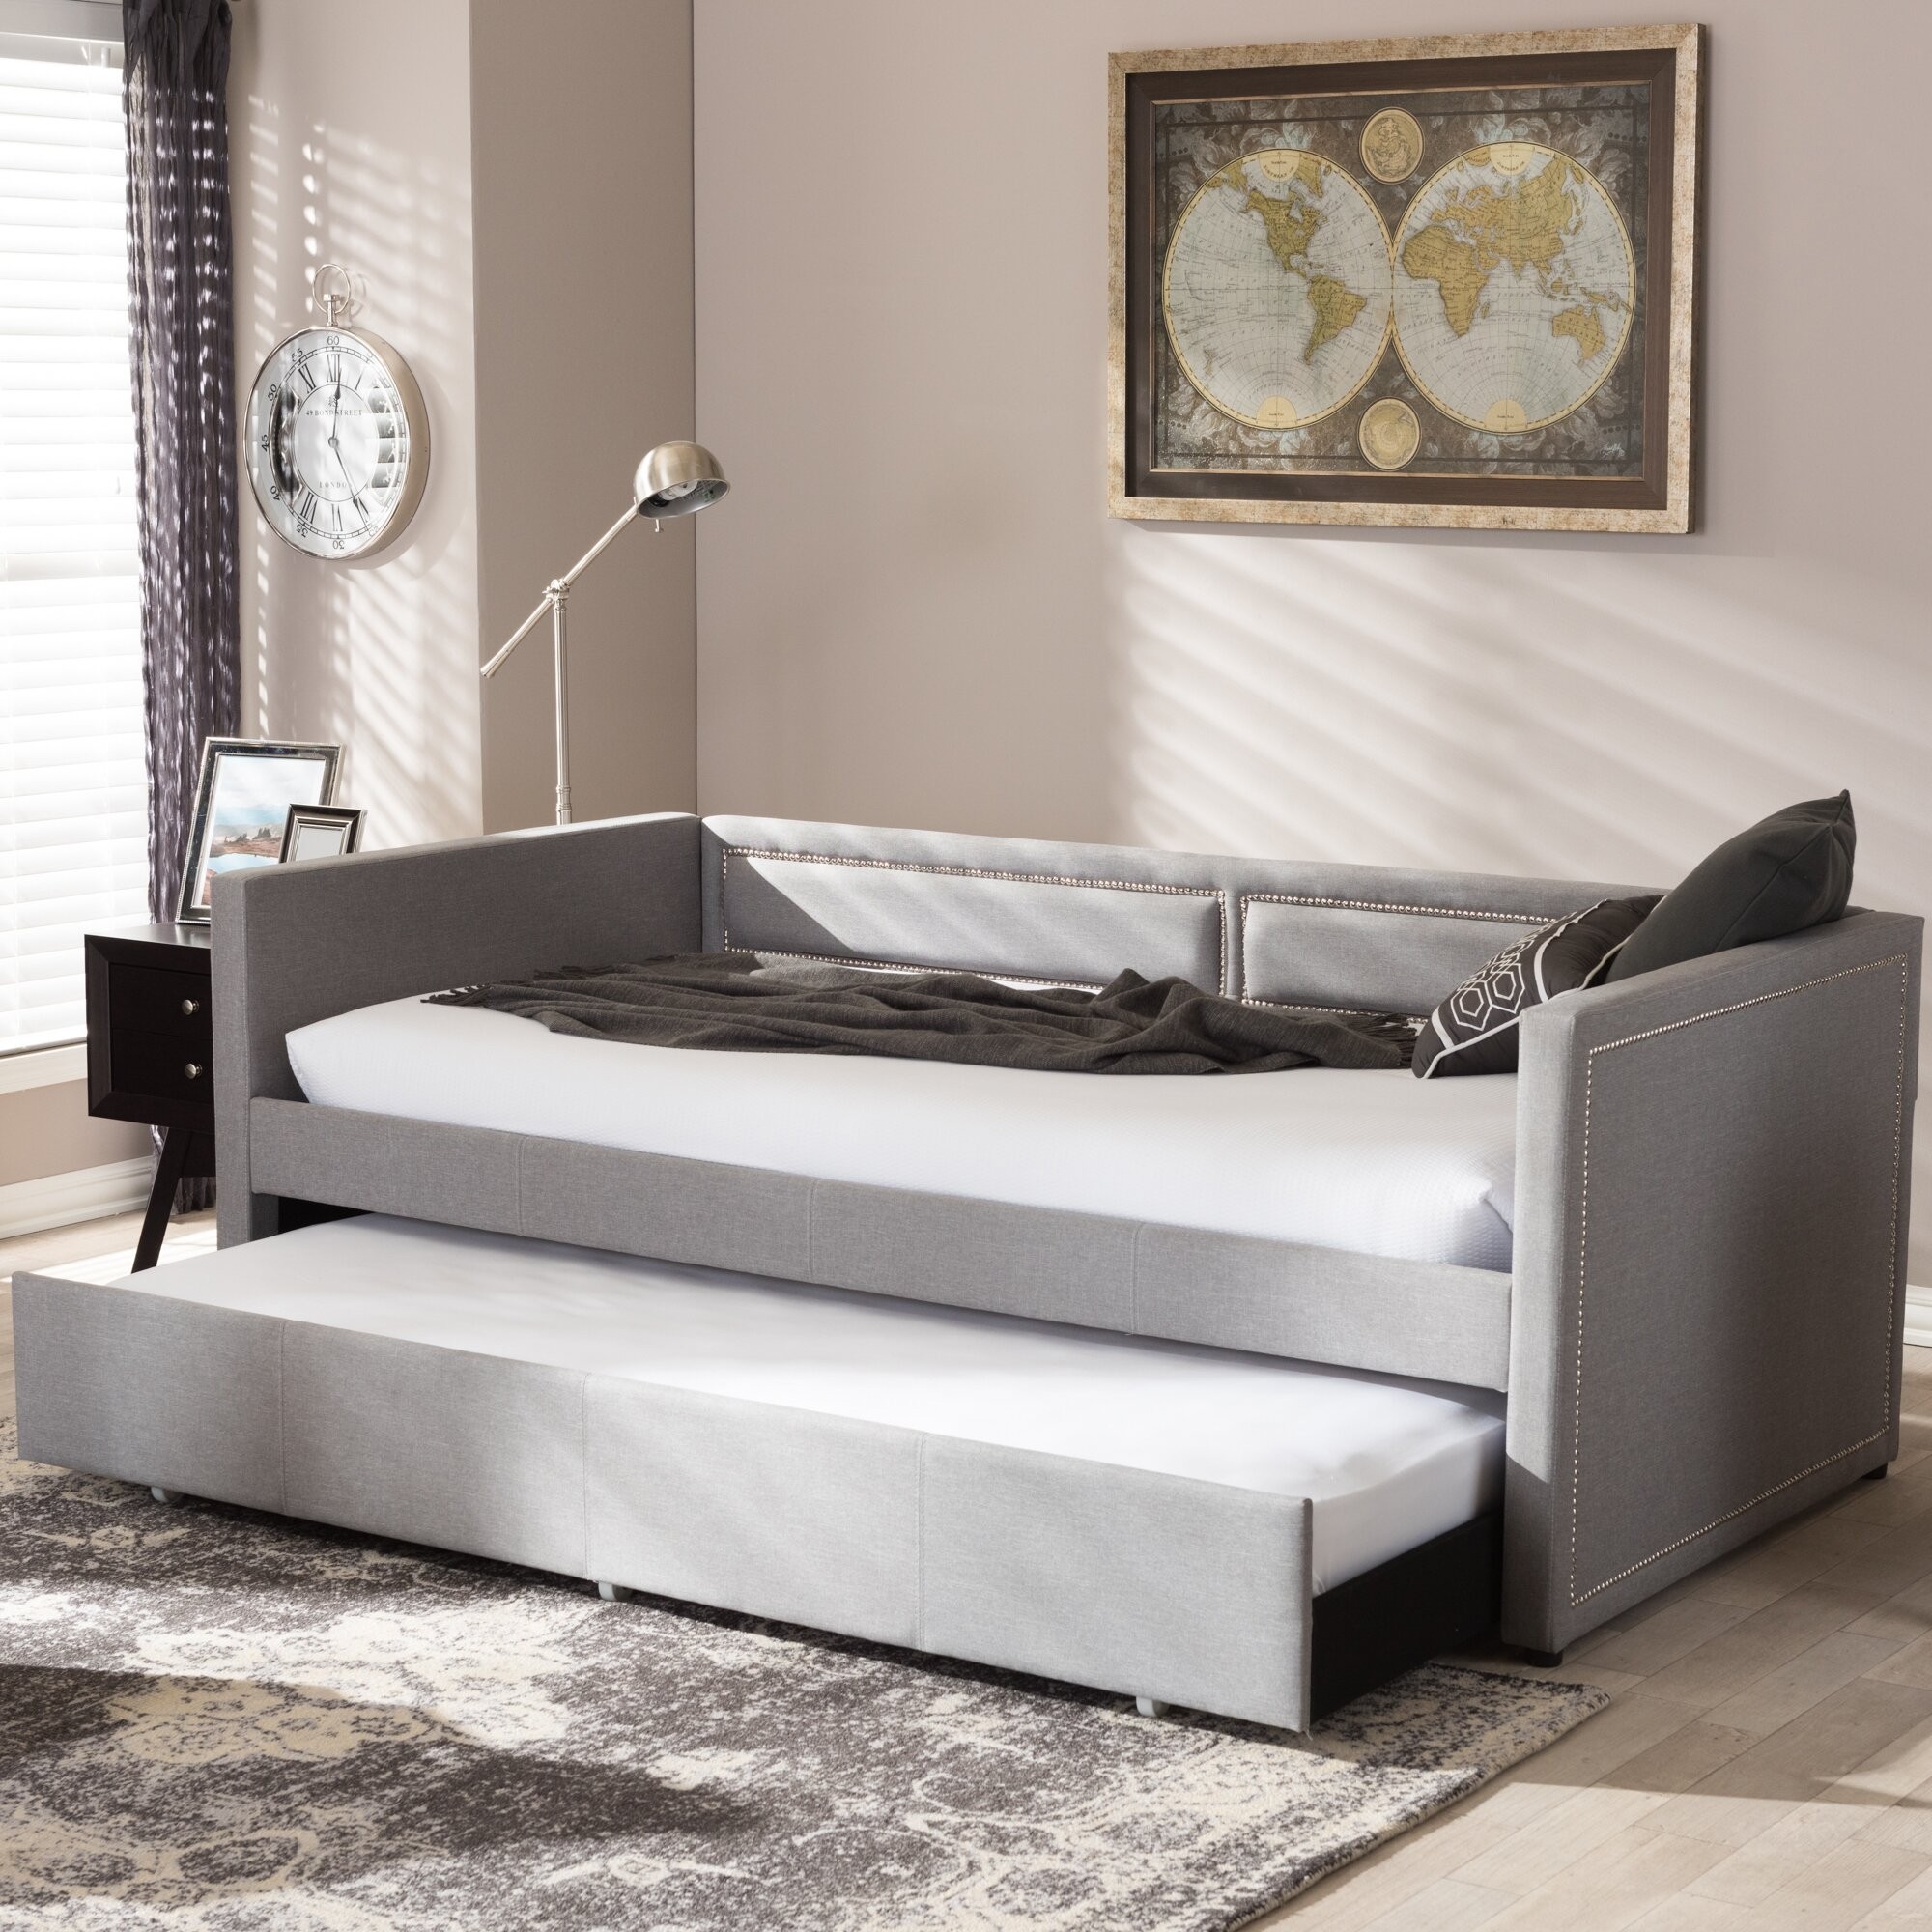 Wholesale interiors baxton studio daybed with trundle 1